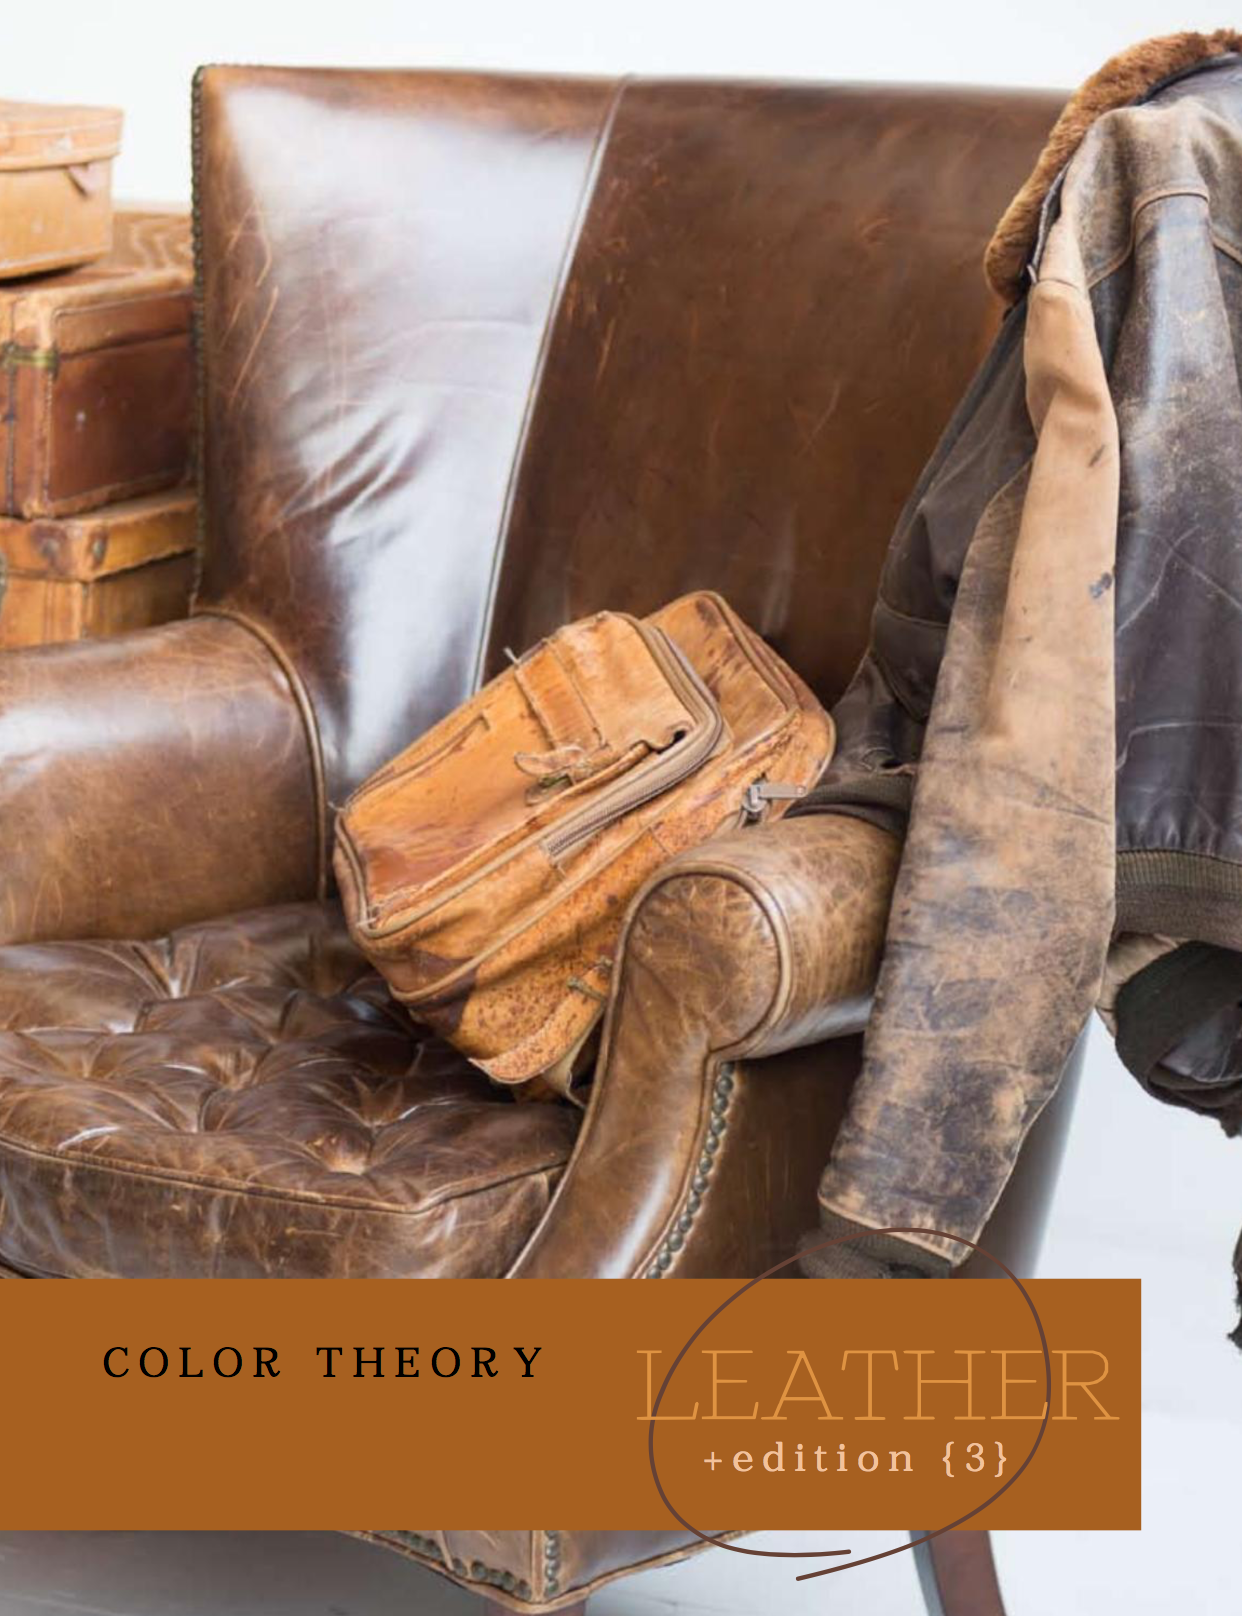 COLOR THEORY // LEATHER